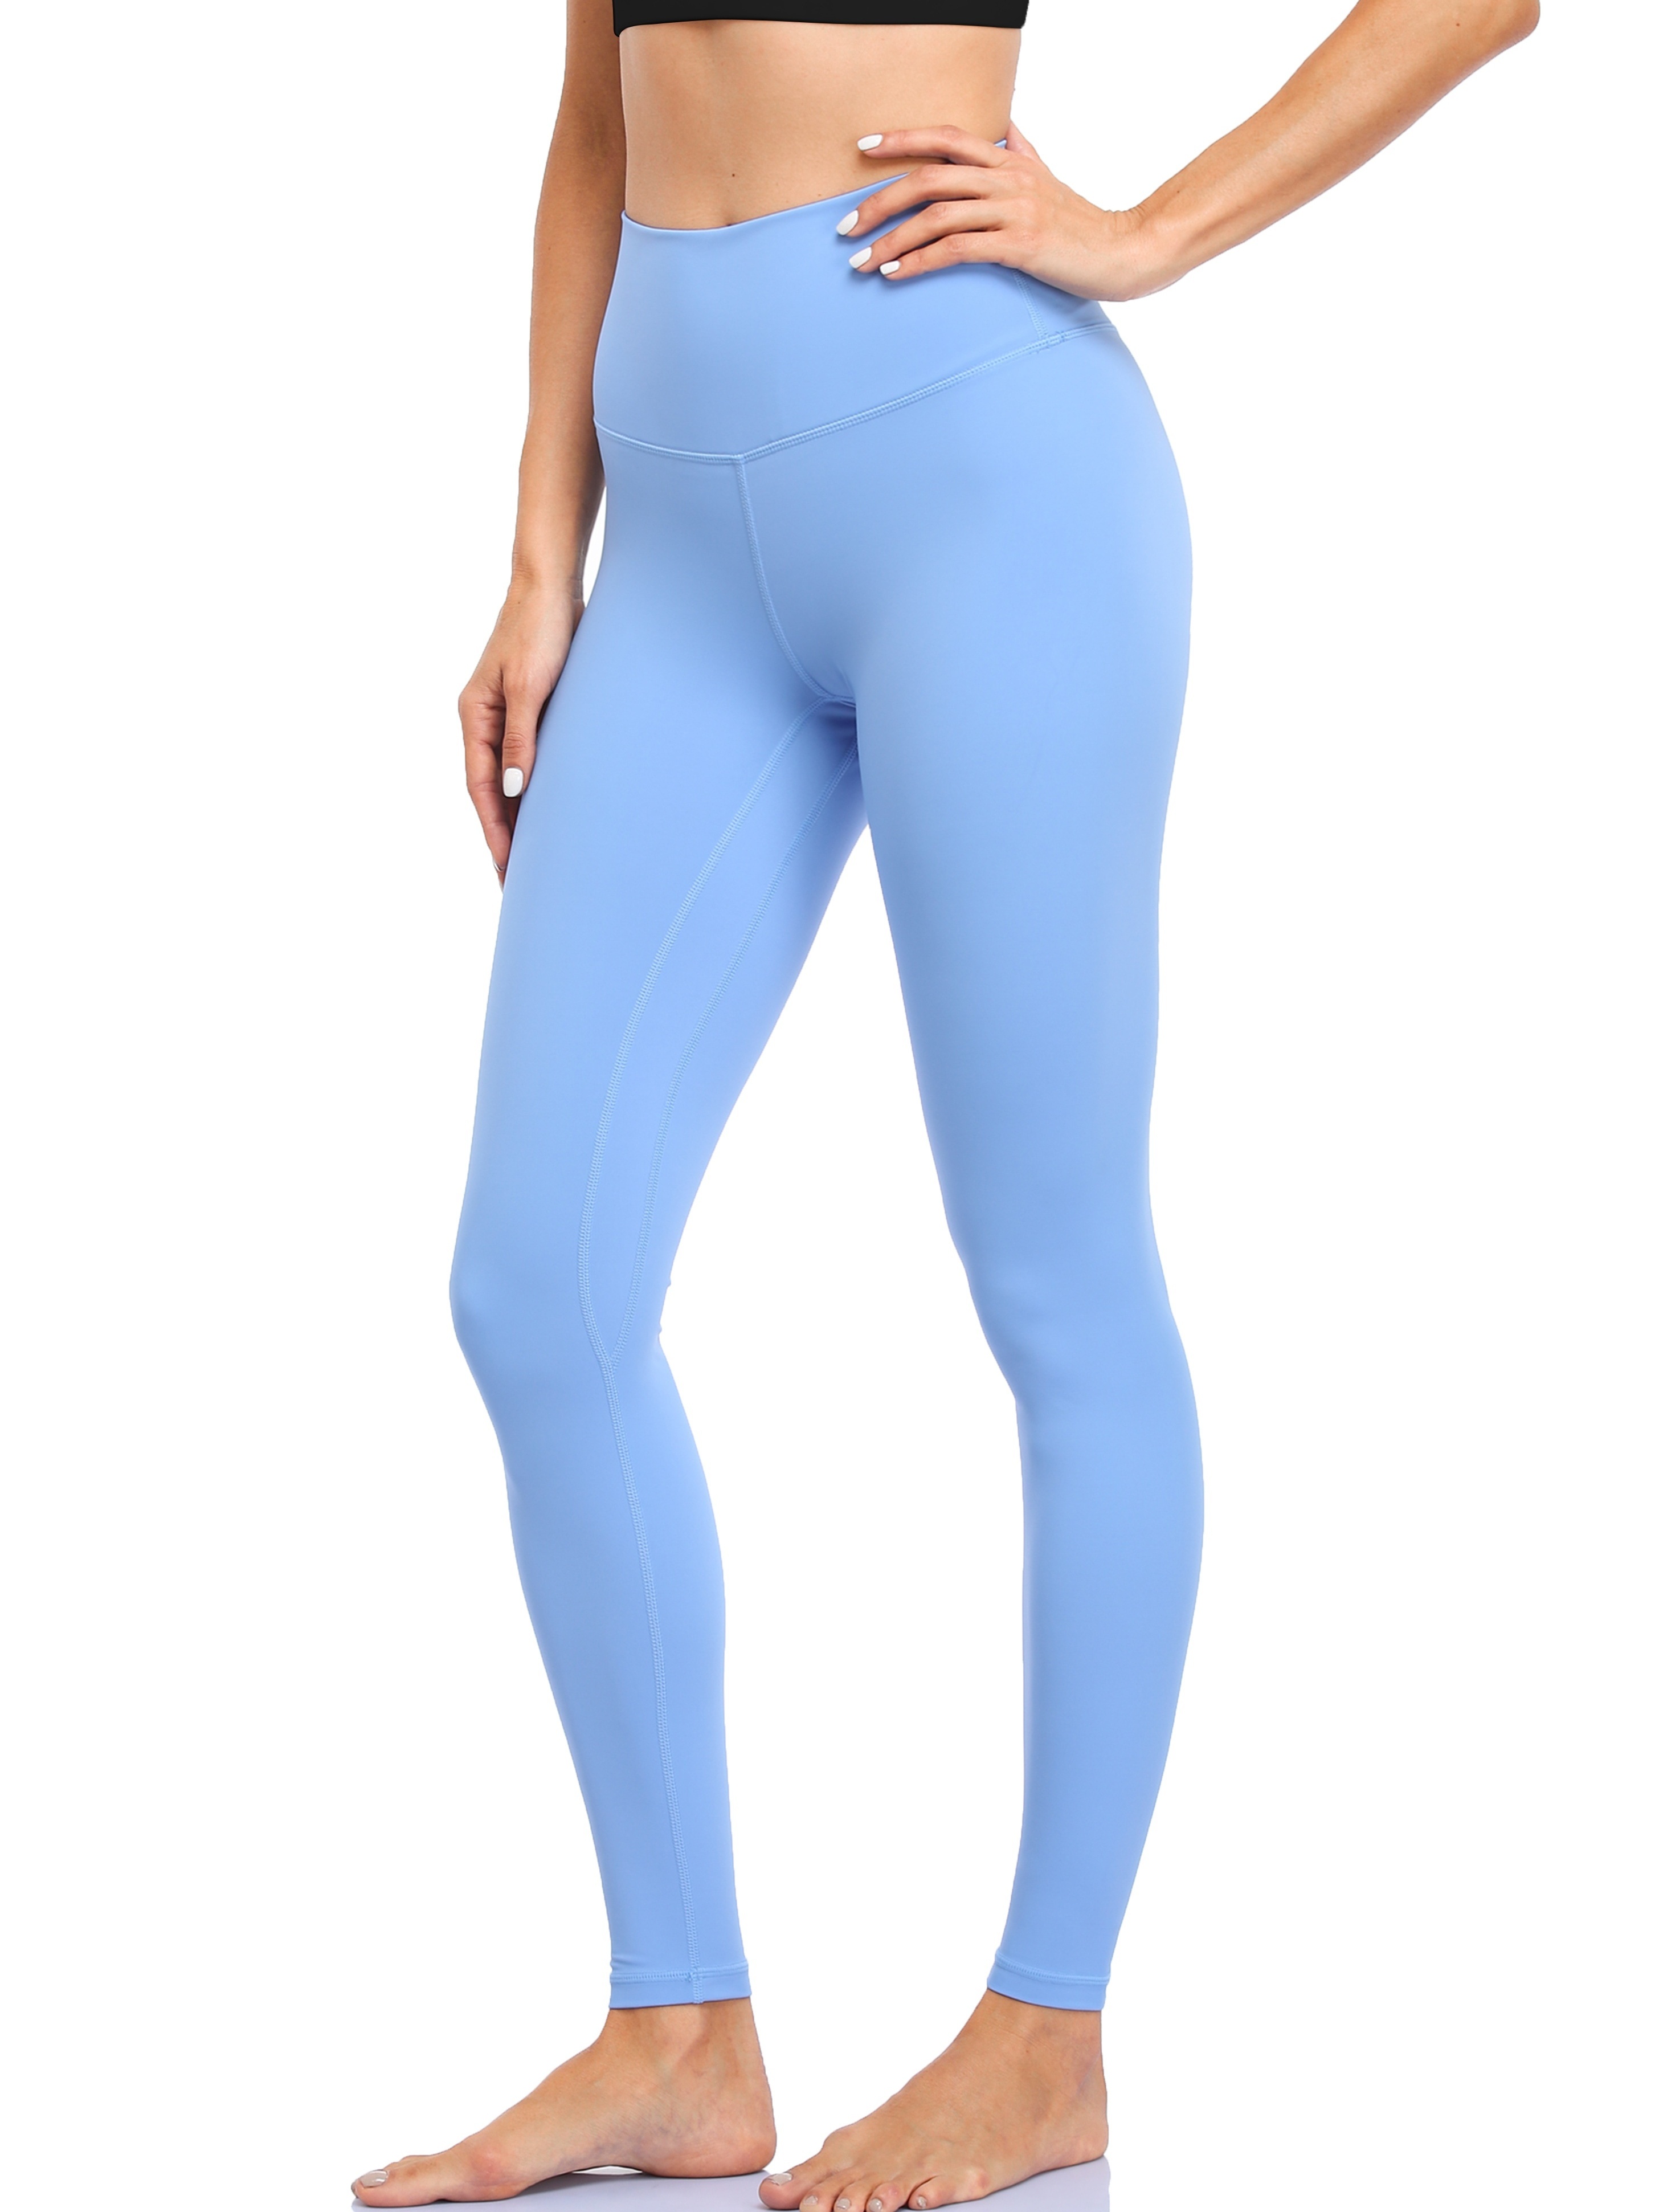 Womens Sports Summer Solid Skimpy Ruched High Waist Soft Leggings for Women  Cute Tights Sexy Tights Skinny Pant Sky Blue